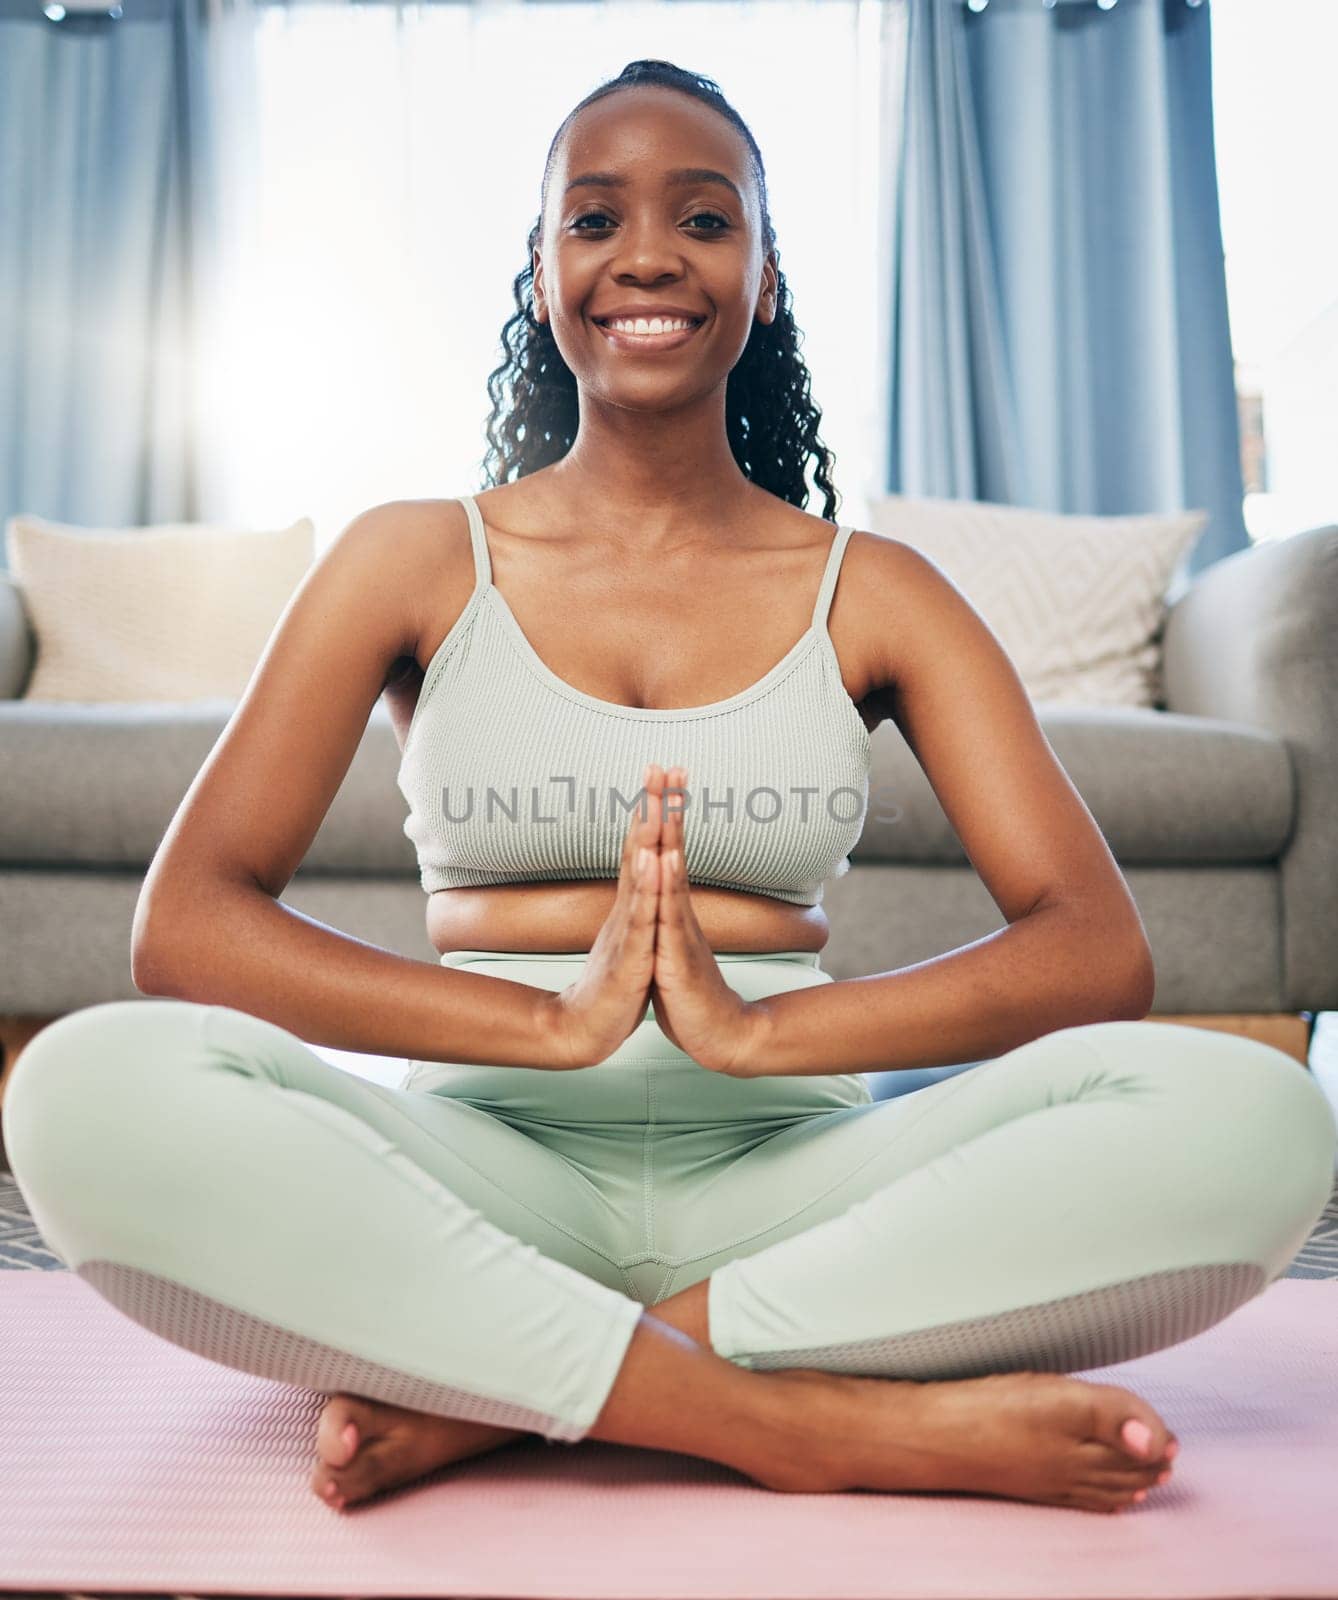 Yoga, namaste woman and zen portrait in living room for fitness, exercise and mindfulness, healing or peace. Meditate, spiritual and black person praying or prayer hands for happy, self care wellness.